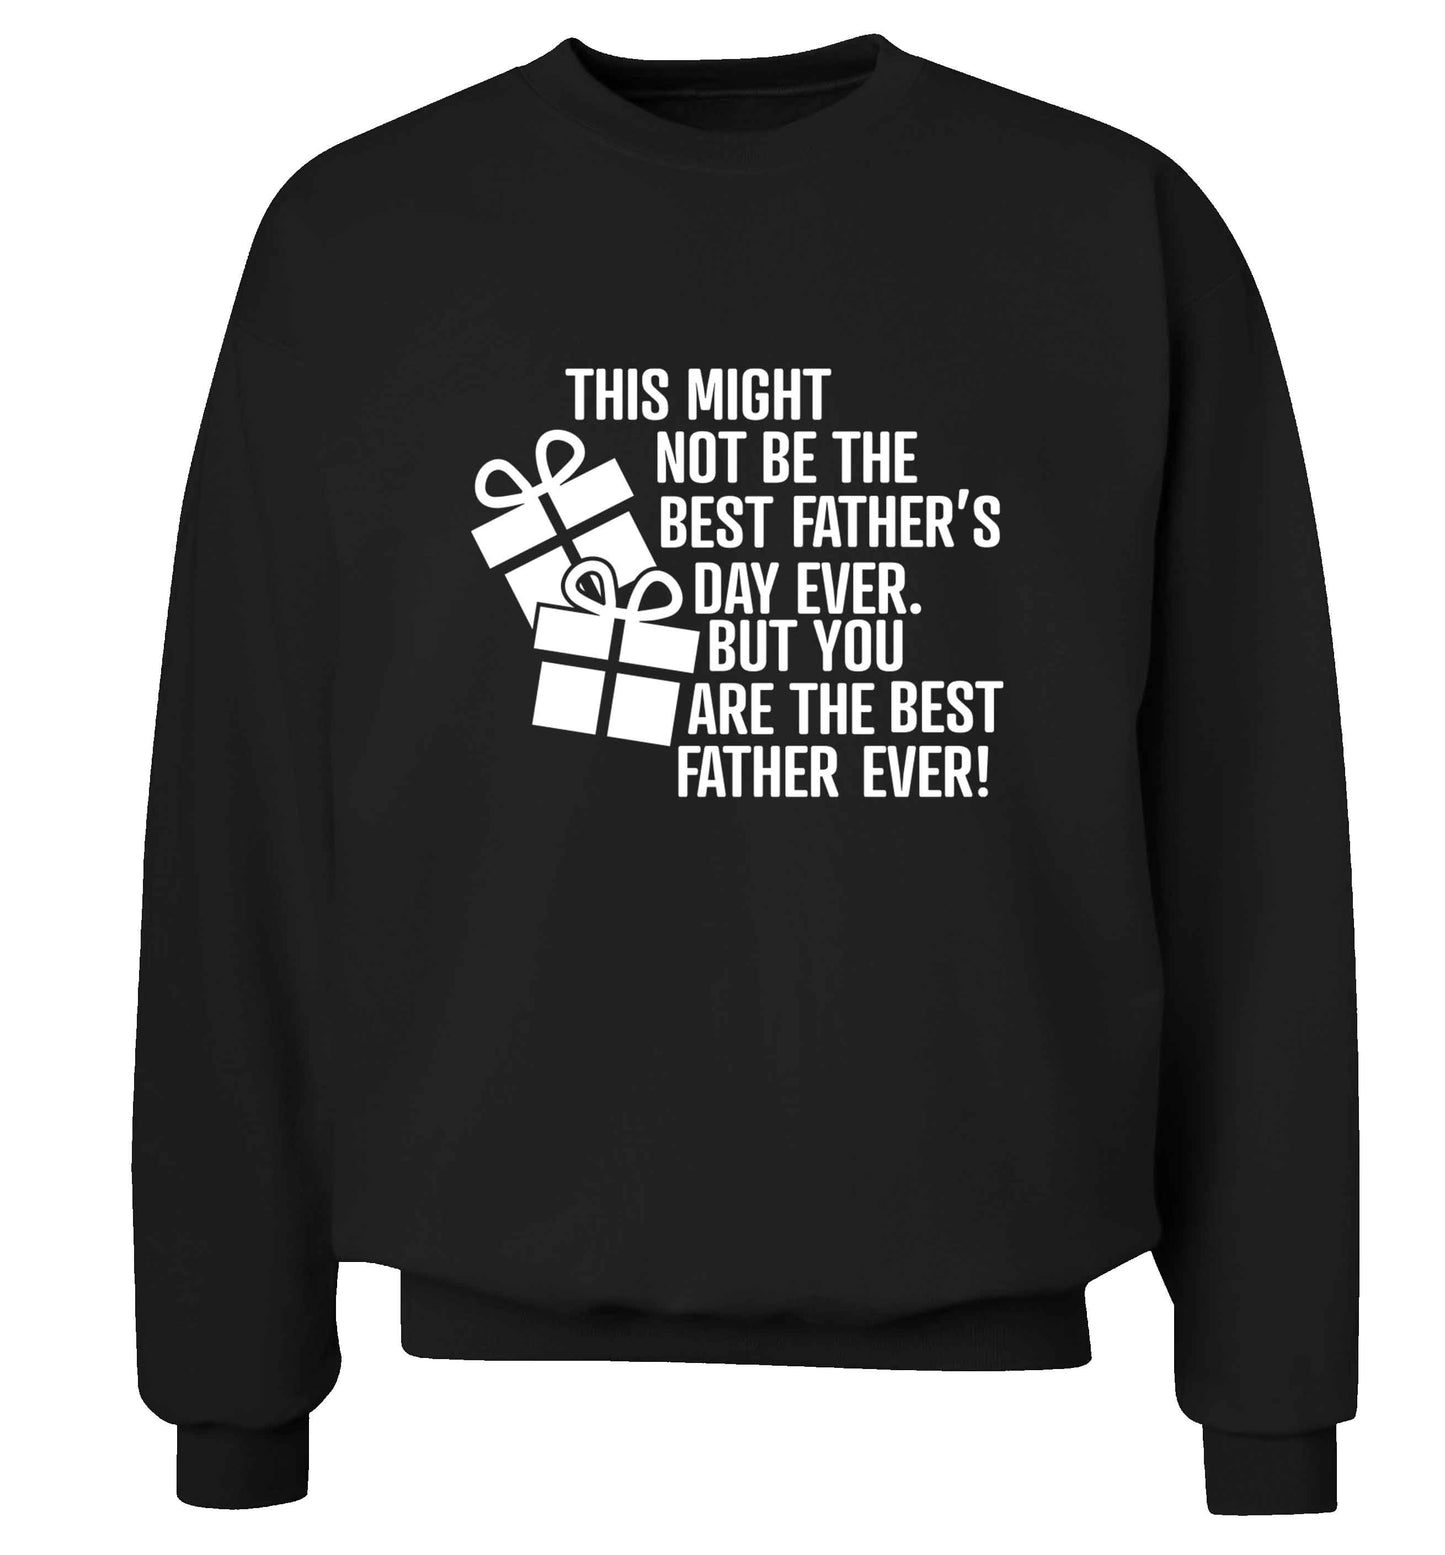 It might not be the best Father's Day ever but you are the best father ever! adult's unisex black sweater 2XL